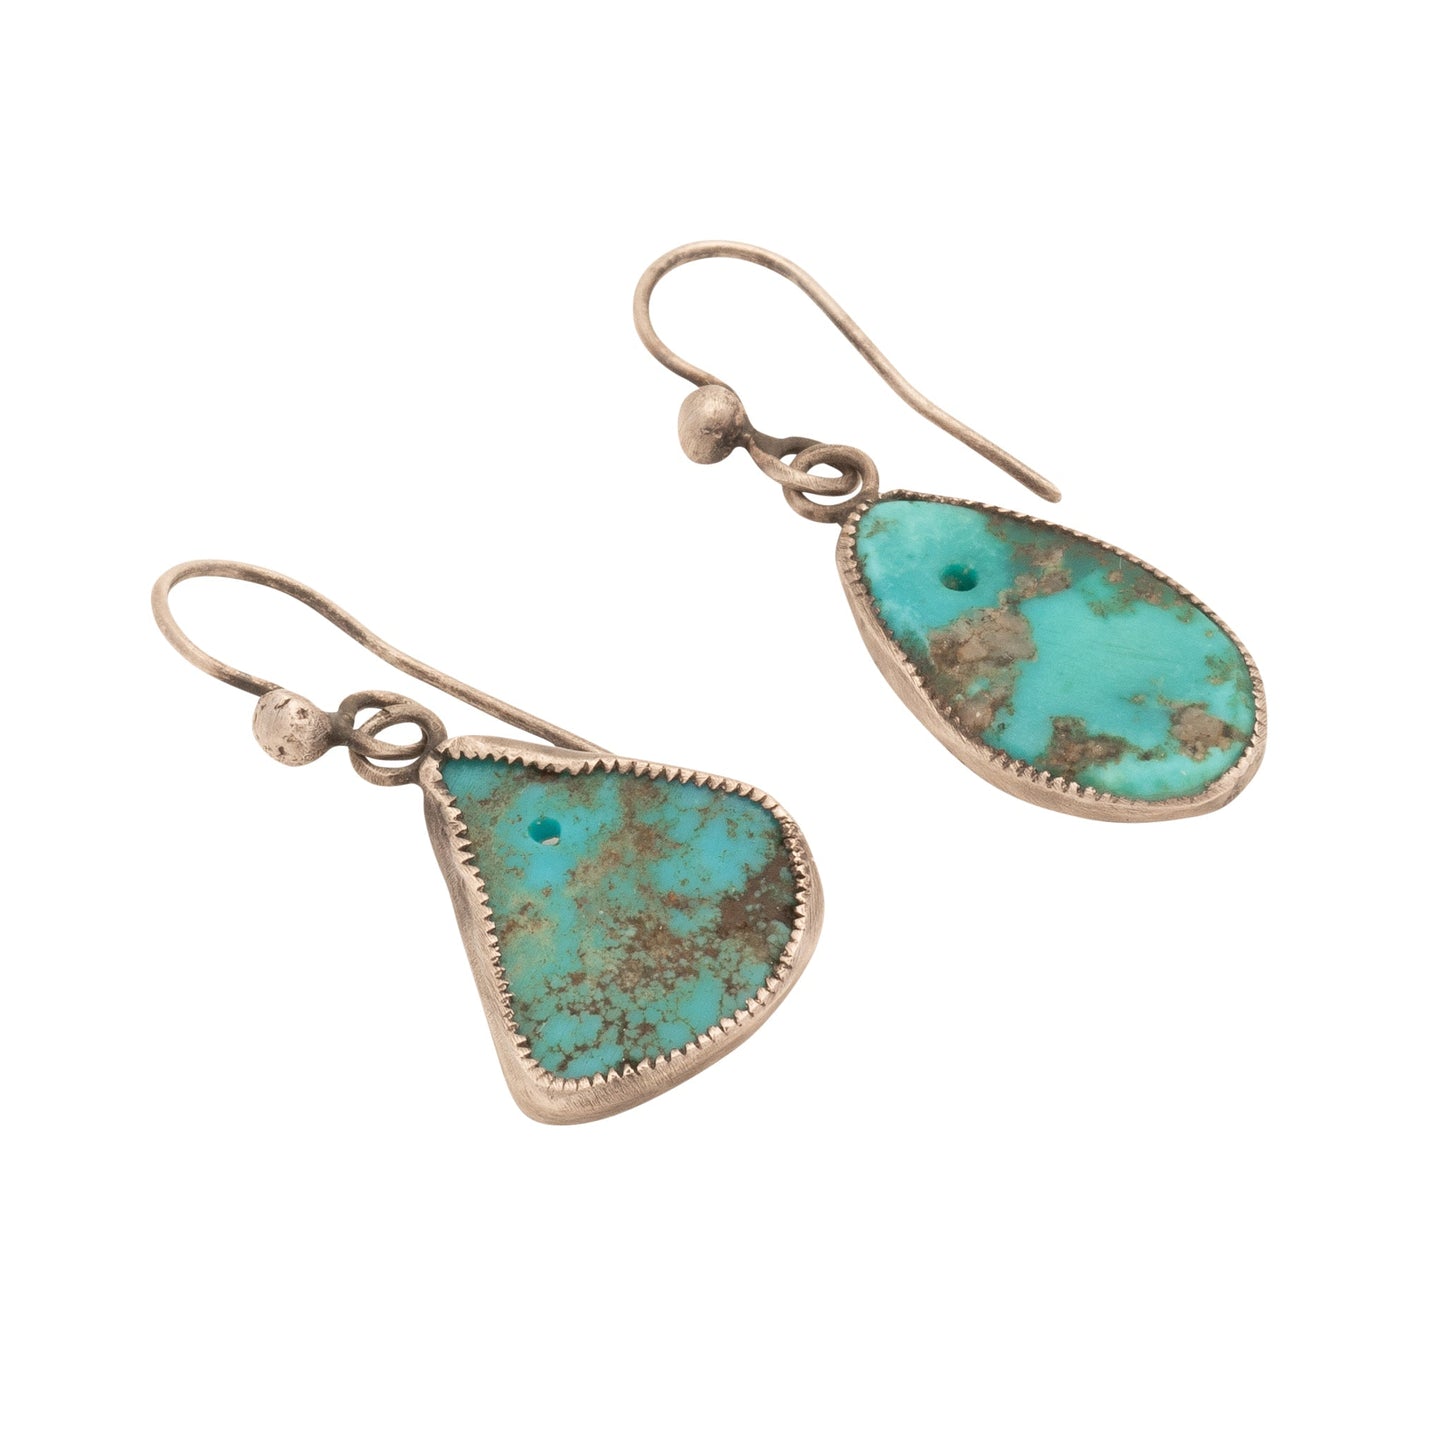 Vintage Pueblo Dangle Earrings of Natural Drilled Turquoise Tabs - Turquoise & Tufa